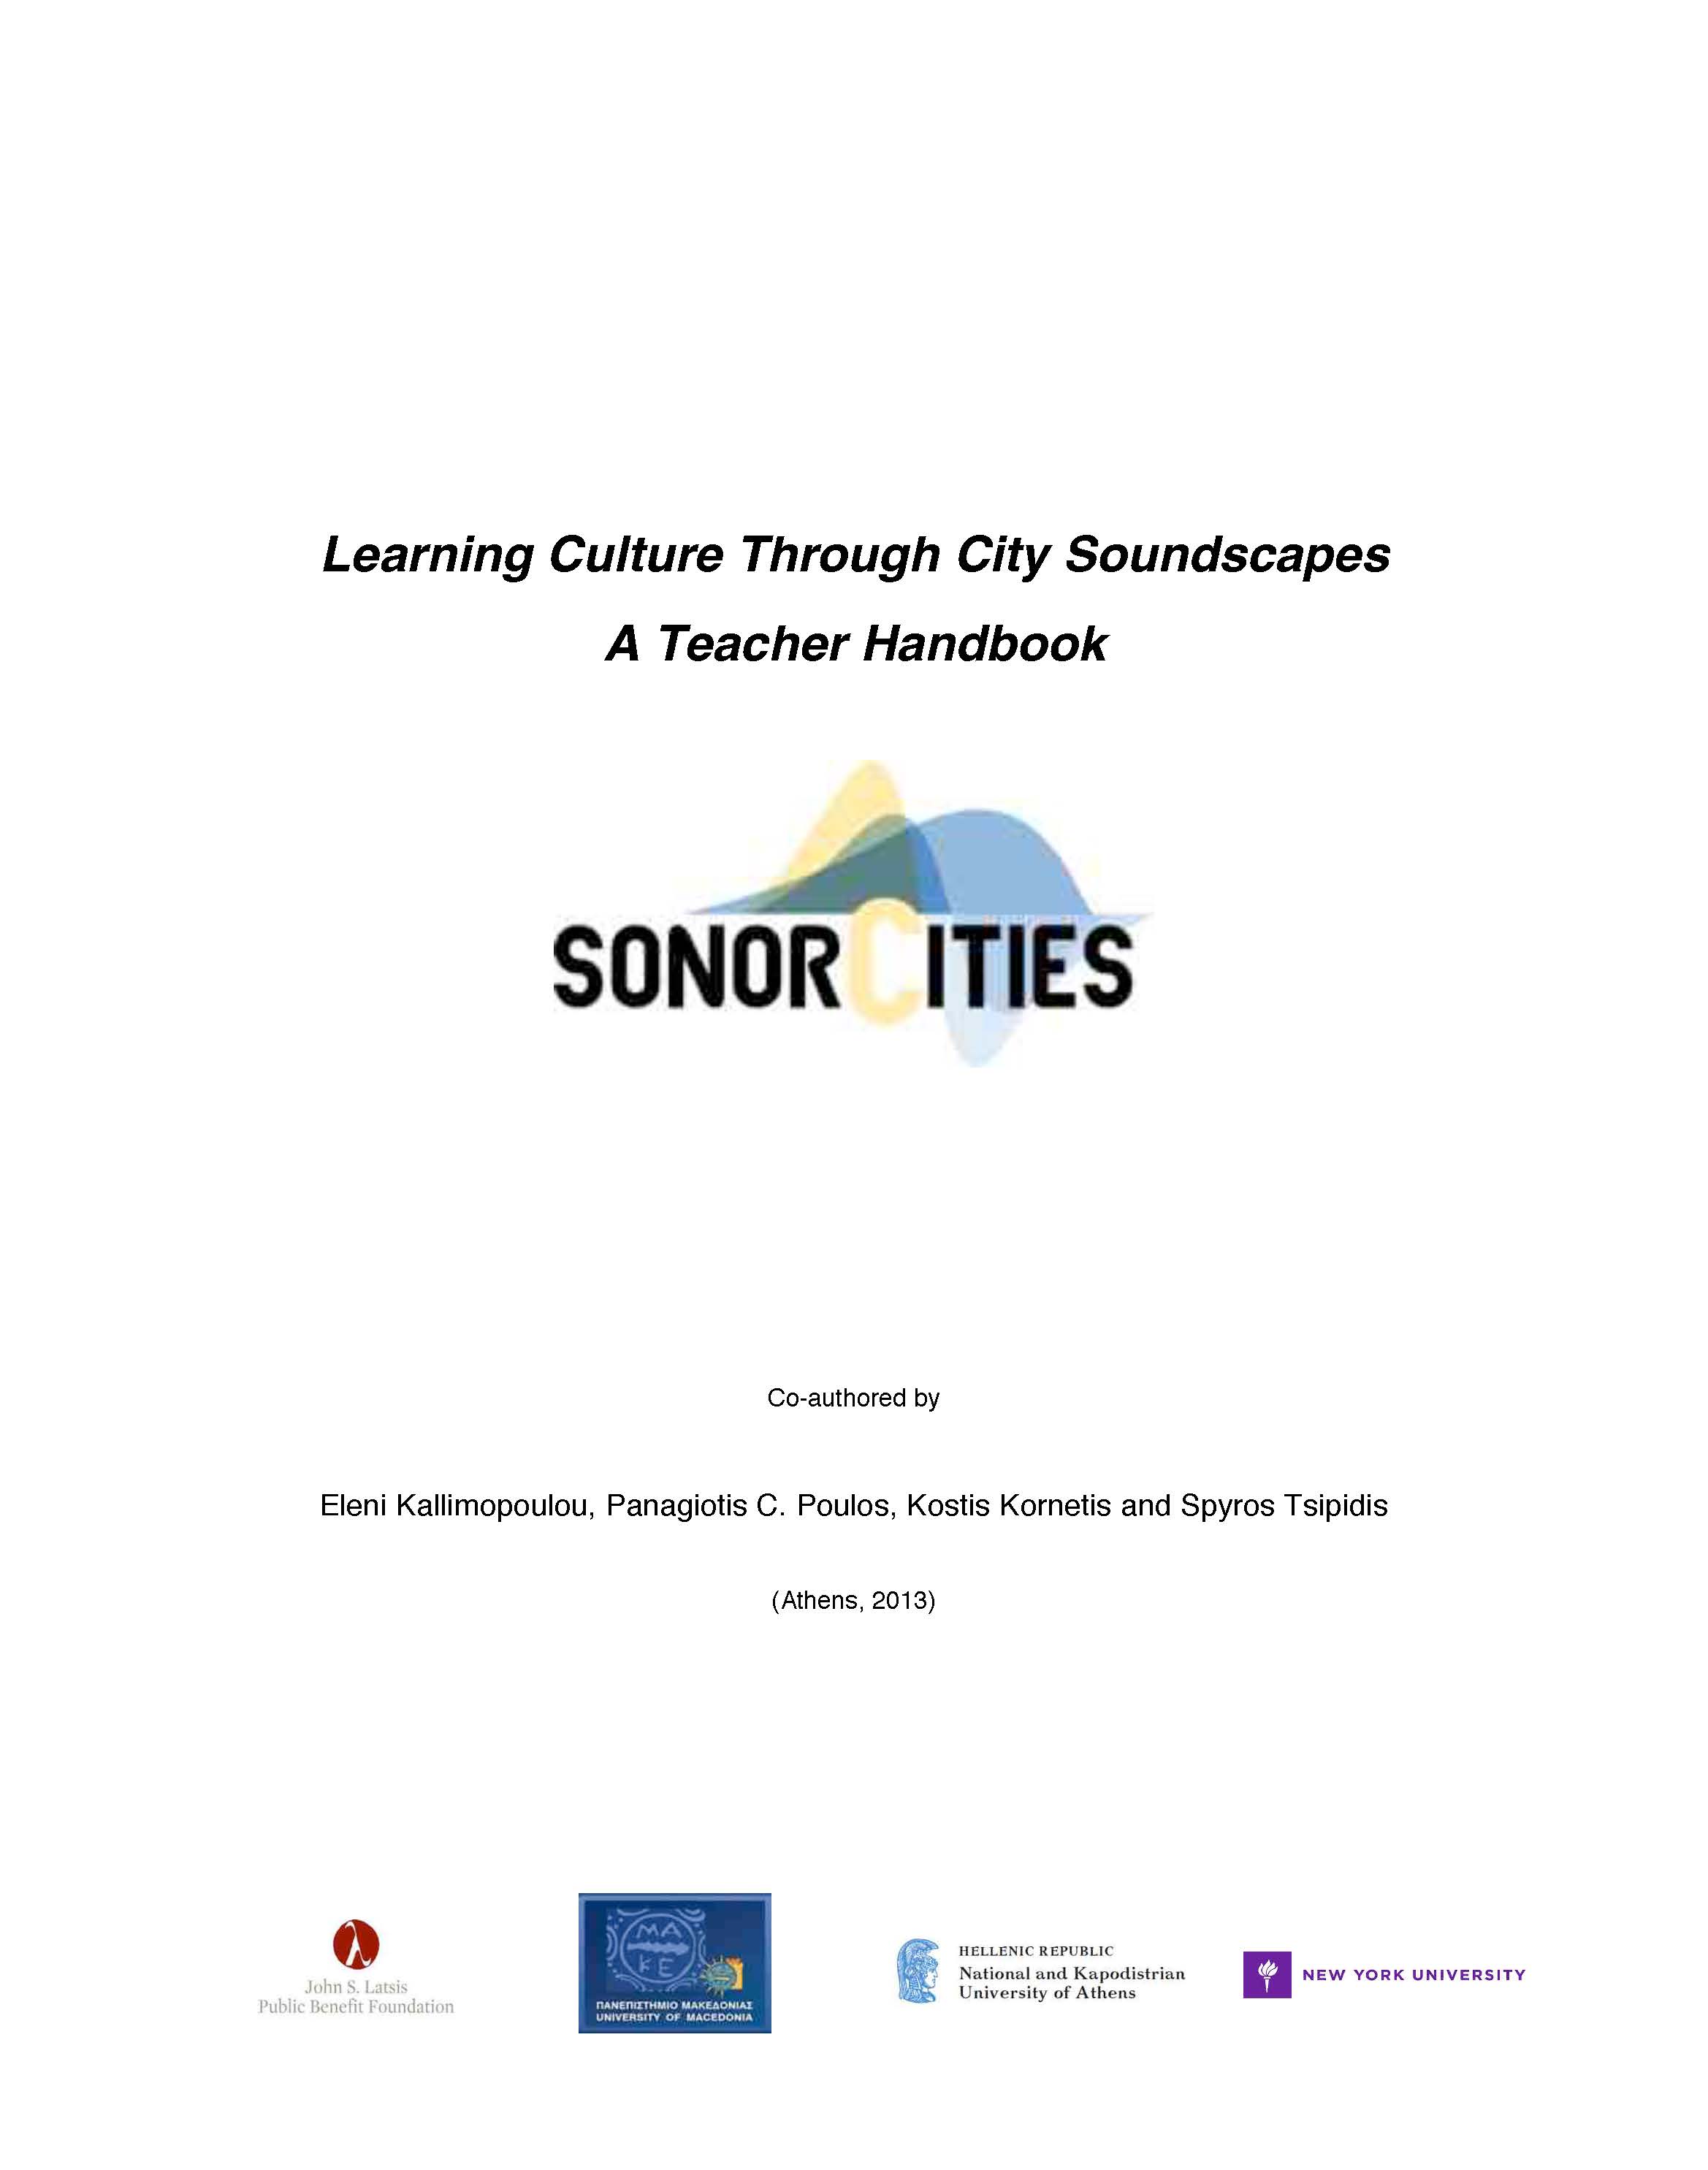 Eleni Kallimopoulou - <p style="box-sizing: border-box;"><span style="box-sizing: border-box; font-style: italic;">Learning culture through city soundscapes</span>&nbsp;is a comprehensive Educational Tool for&nbsp;understanding cultural practices and cultural heritage through the&nbsp;ethnographic documentation of the soundscapes of the city. Specifically,&nbsp;through guided fieldwork projects centering on the sound topography of the&nbsp;city, participants create digital representations of the collected archival, textual, visual, musical and sonic data within an Interactive&nbsp;Digital Environment. This dynamic cartographic approach to the city&nbsp;soundscapes feeds back into the educational process, providing a useful&nbsp;medium for a critical understanding of the notion of culture.</p><span style="text-align: justify;">"The proposed&nbsp;Educational Tool is designed for university programmes in the fields of&nbsp;ethnomusicology, music history, cultural history, anthropology, cultural&nbsp;studies and cultural geography. It combines digital humanities with&nbsp;conventional teaching methods, and aims to incorporate new technologies in&nbsp;teaching; to propose a learning model based on personal engagement with the&nbsp;world; to provide an interface between the university classroom and society;&nbsp;and to preserve and disseminate cultural heritage.</span><div><div><br></div><p style="">The&nbsp;<a href="http://sound-cities.turkmas.uoa.gr/?page_id=54" target="_blank" data-bypass="true">pilot application</a>&nbsp;constitutes a dynamic digital representation of the sound history of the&nbsp;<a href="http://www.archnet.org/sites/16114" target="_blank">Old Achaeological Museum</a>&nbsp;(Yeni Camii) of Thessaloniki, throughout the twentieth century.</p><div><span style="text-align: justify;">The Teacher Handbook is an Open Educational Resource (i.e. an open-access digital publication in pdf format) that forms the main reference for the teacher who runs&nbsp;</span><a href="http://sound-cities.turkmas.uoa.gr/?page_id=308" target="_blank" data-bypass="true" style="box-sizing: border-box; text-align: justify;">Learning Culture through City Soundscapes – An Educational Tool</a><span style="box-sizing: border-box; text-align: justify;">&nbsp;</span><span style="text-align: justify;">in class. The Teacher Handbook contains all the technical guidelines, theoretical material and other supportive material needed for setting up and carrying out the project."</span></div></div><div><span style="text-align: justify;"><br></span></div><div style="text-align: justify; ">Source:&nbsp;<a href="http://sound-cities.turkmas.uoa.gr/" target="_blank" data-bypass="true">SonorCities</a></div>